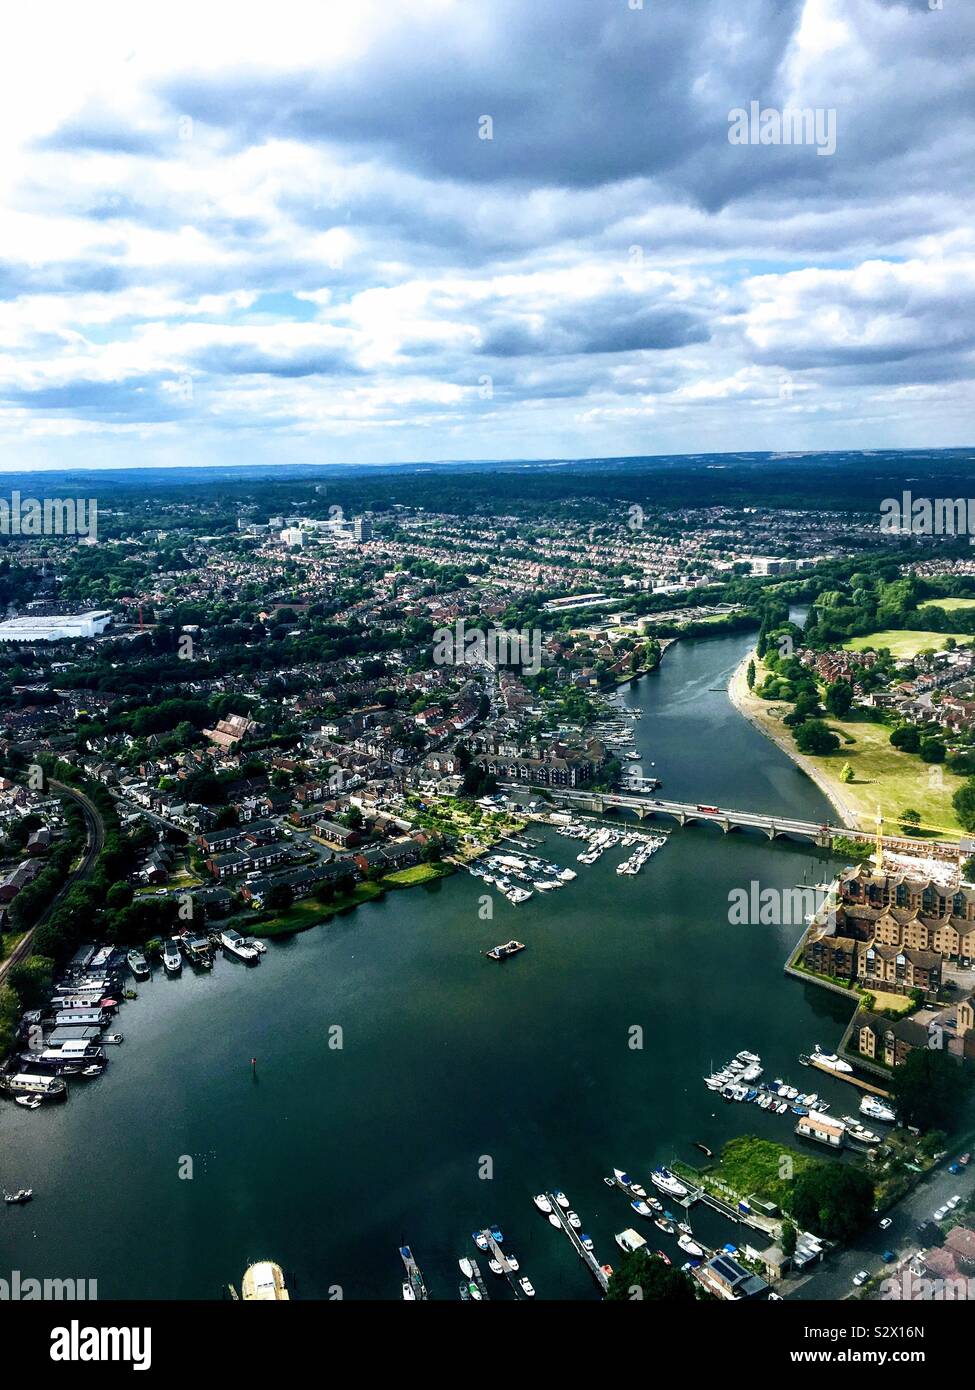 View of River Itchen and Cobden Bridge in Southampton, UK from Southampton-Schipol flight, June 2017 Stock Photo